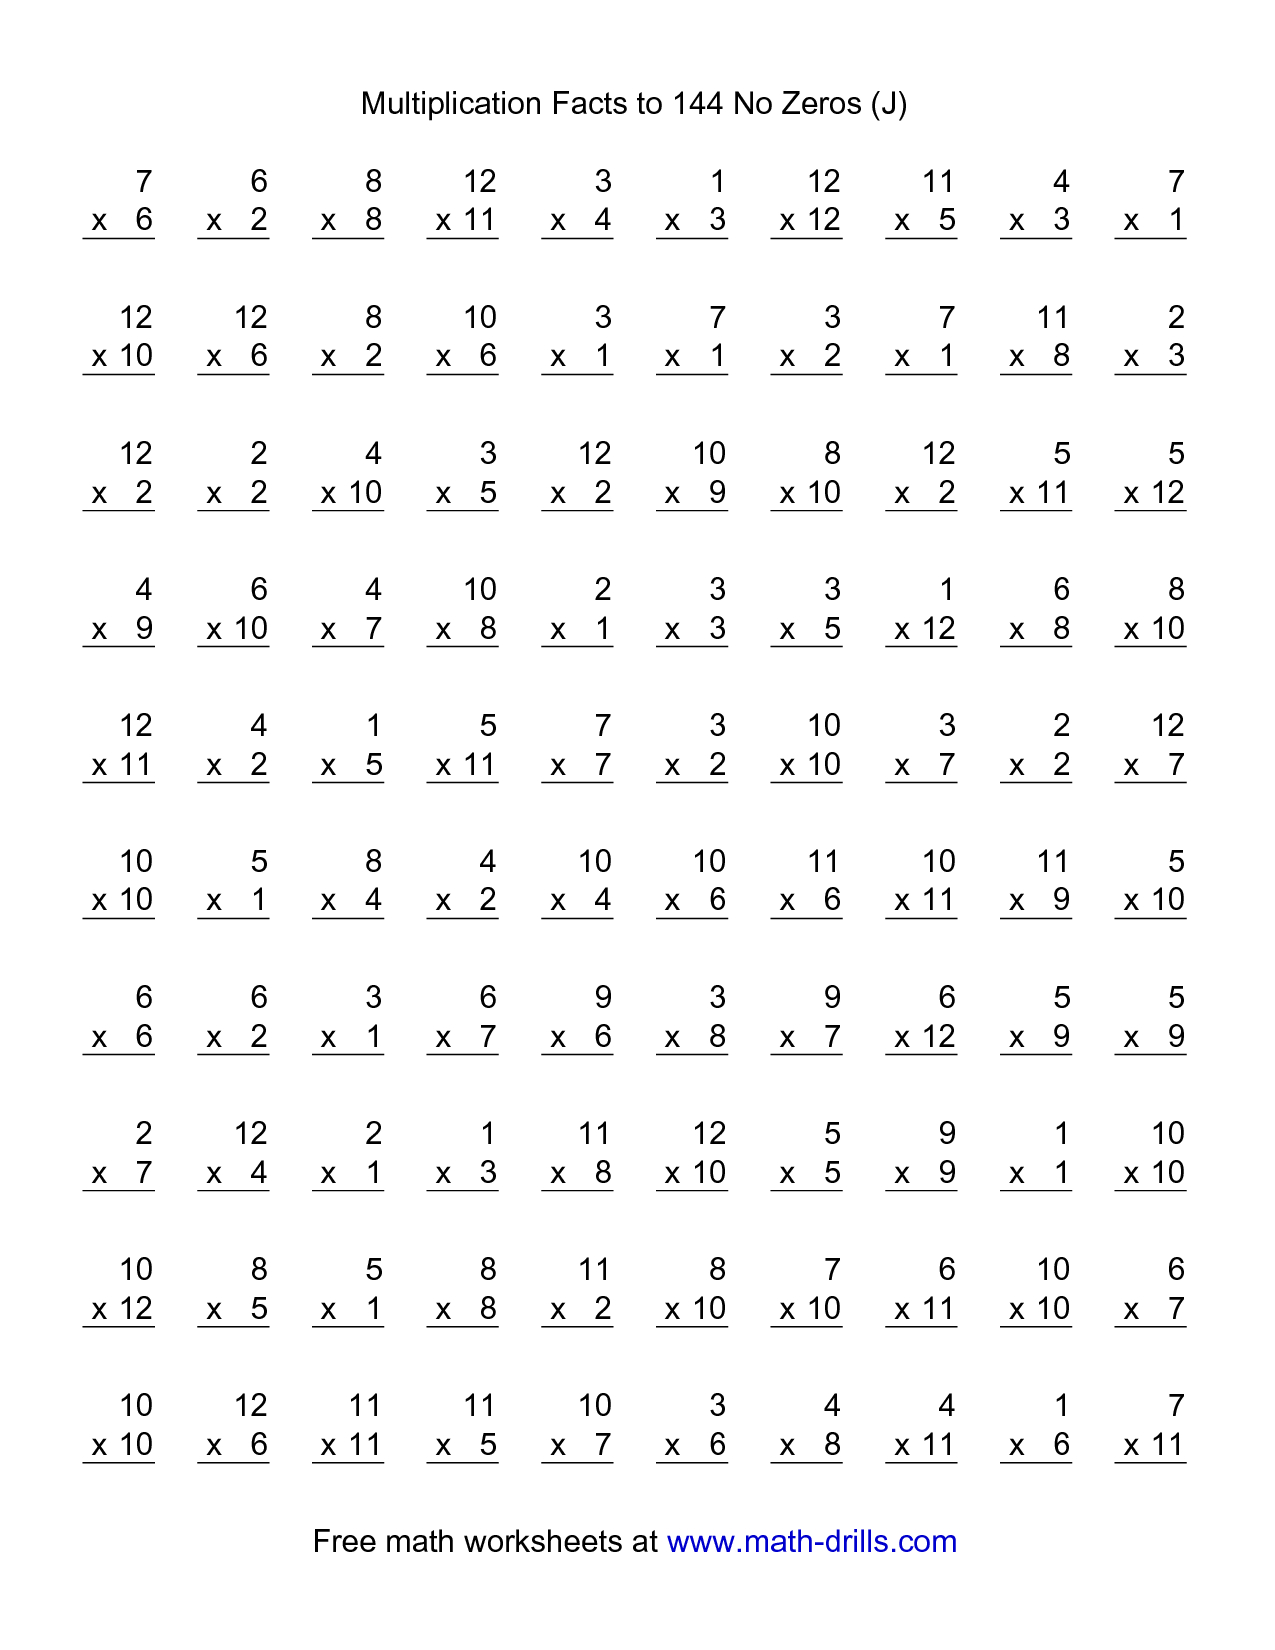 Multiplication Facts Worksheets | Multiplication Facts To 144 No - Free Printable Math Worksheets Multiplication Facts